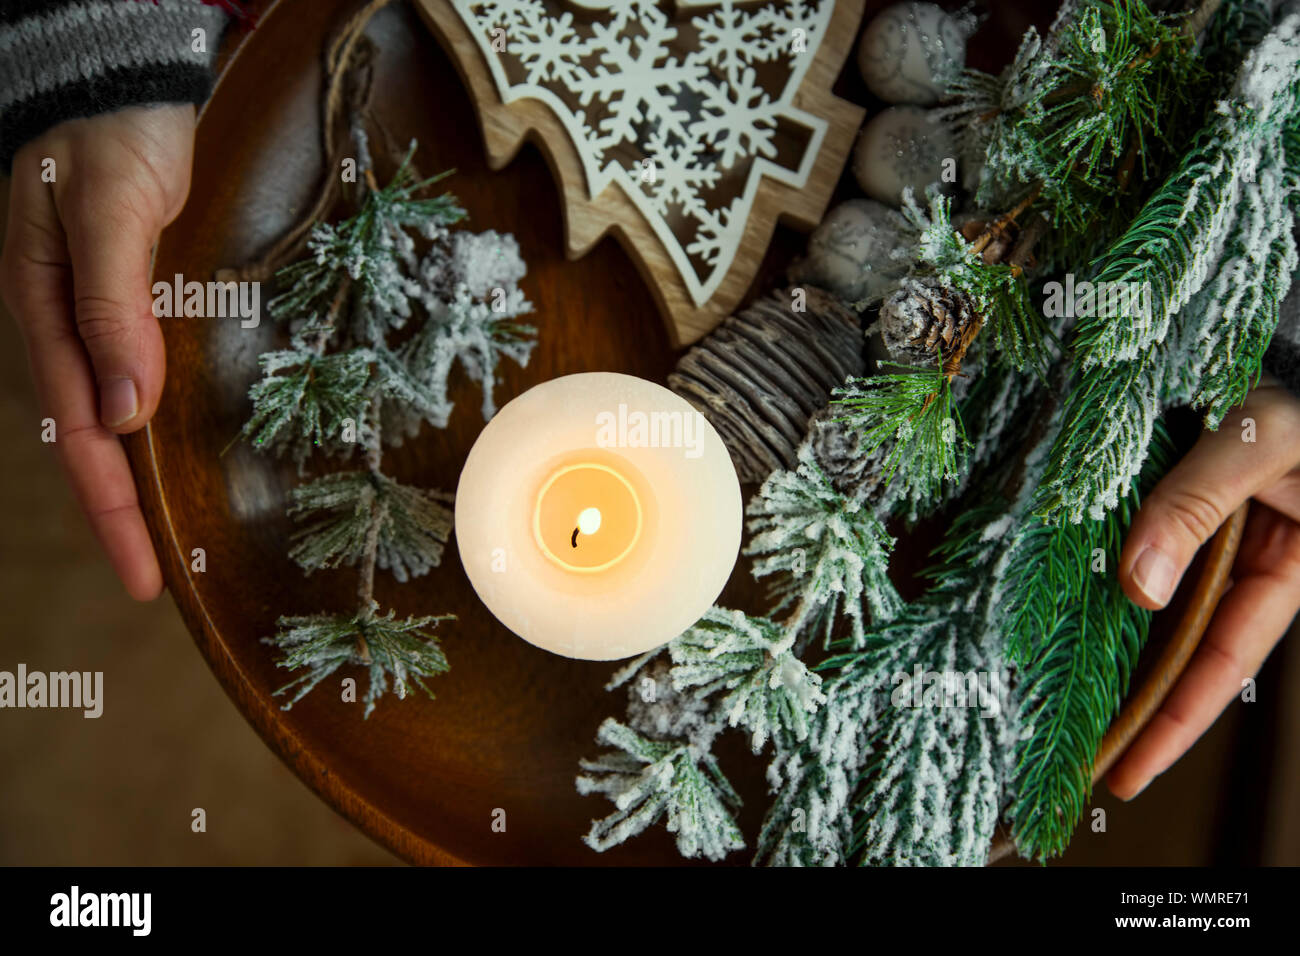 Fall /winter cozy home deco concept with woman holding wooden tray with fir tree branches and candle, cozy home concept Stock Photo